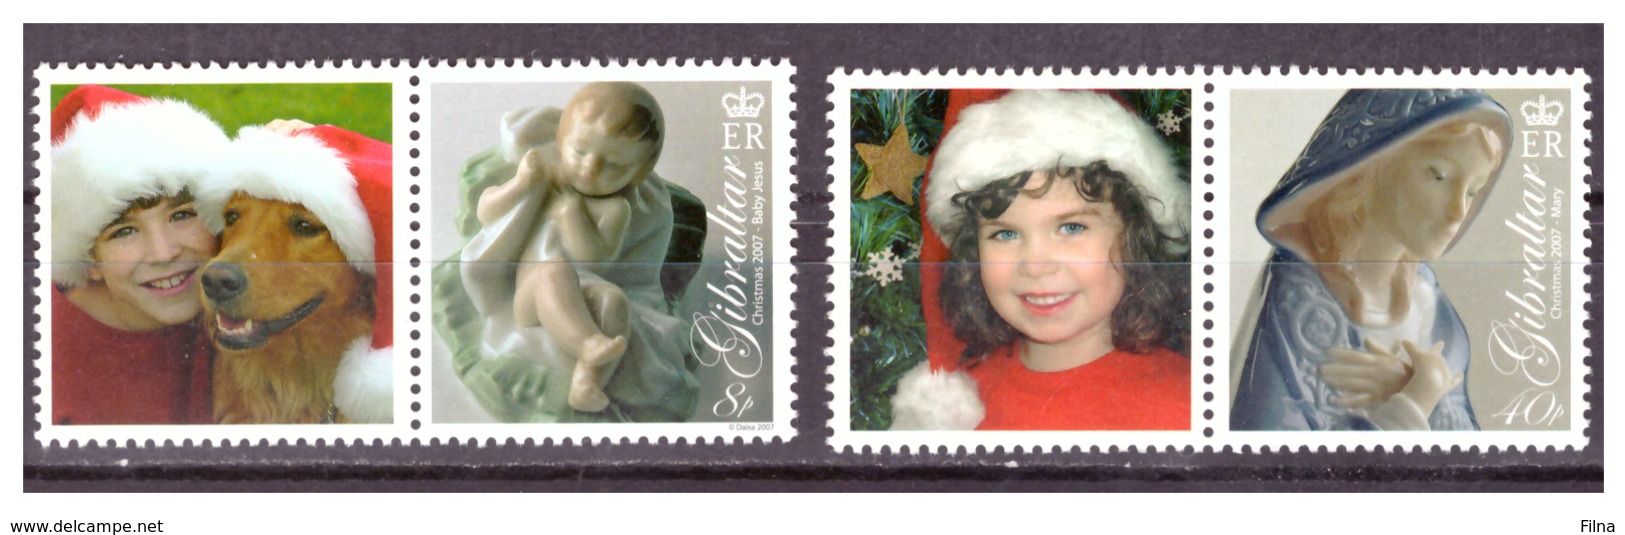 GIBRALTAR -  2007 - CHRISTMAS. COMPLETE SET WITH PERSONALISED LEFT APPENDIX. - MNH** - Gibraltar